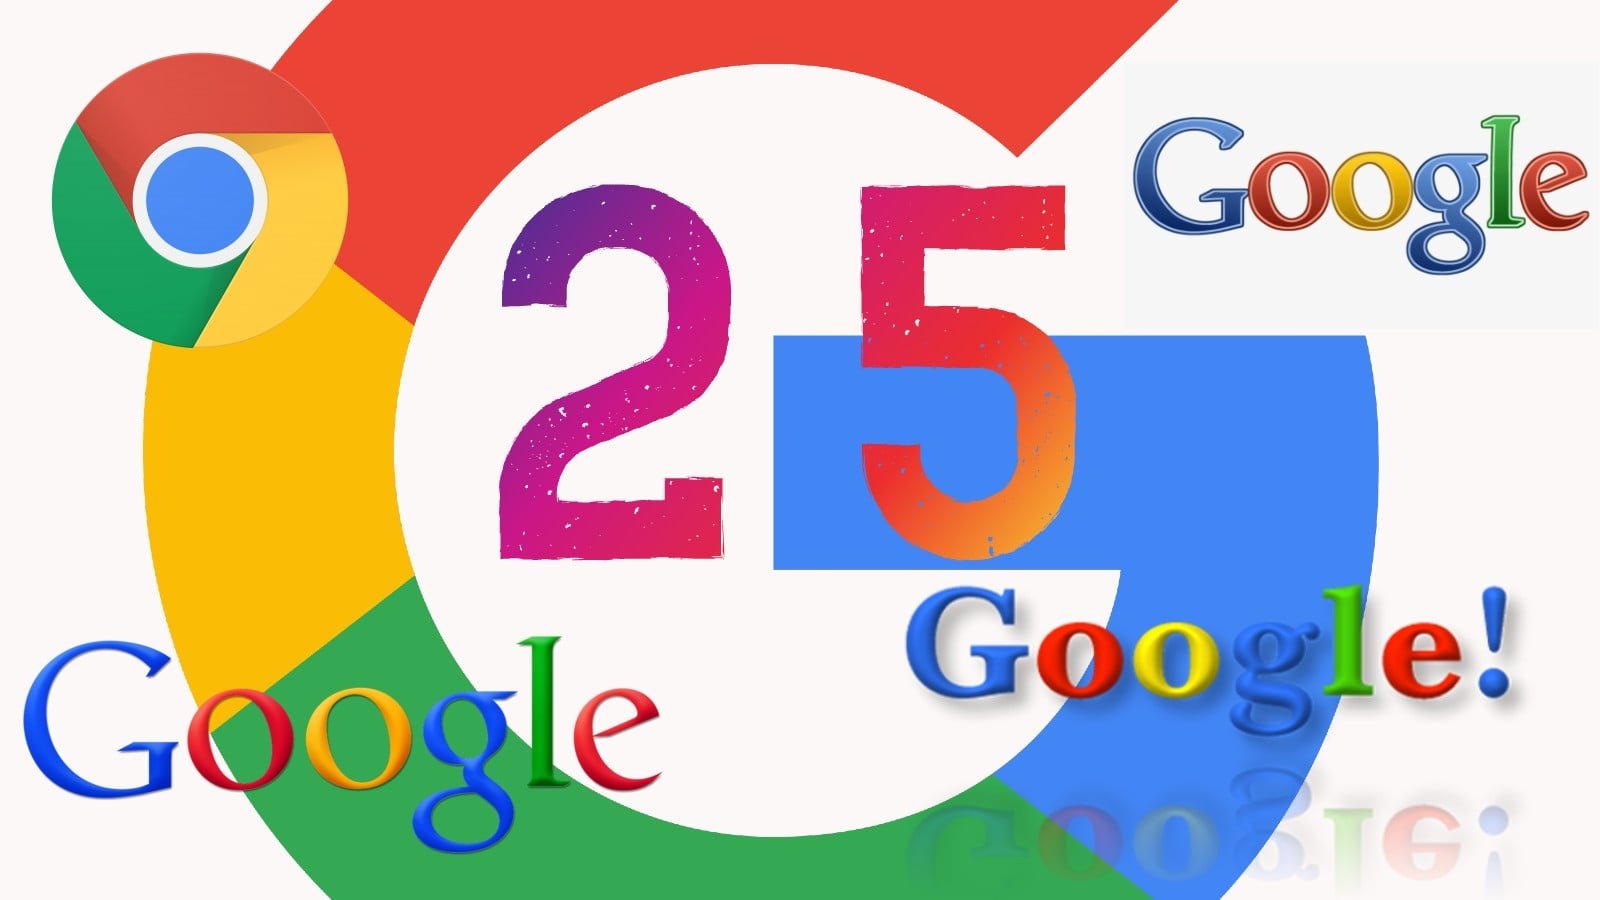 Google turns 25, expresses happiness by celebrating through new Doodle